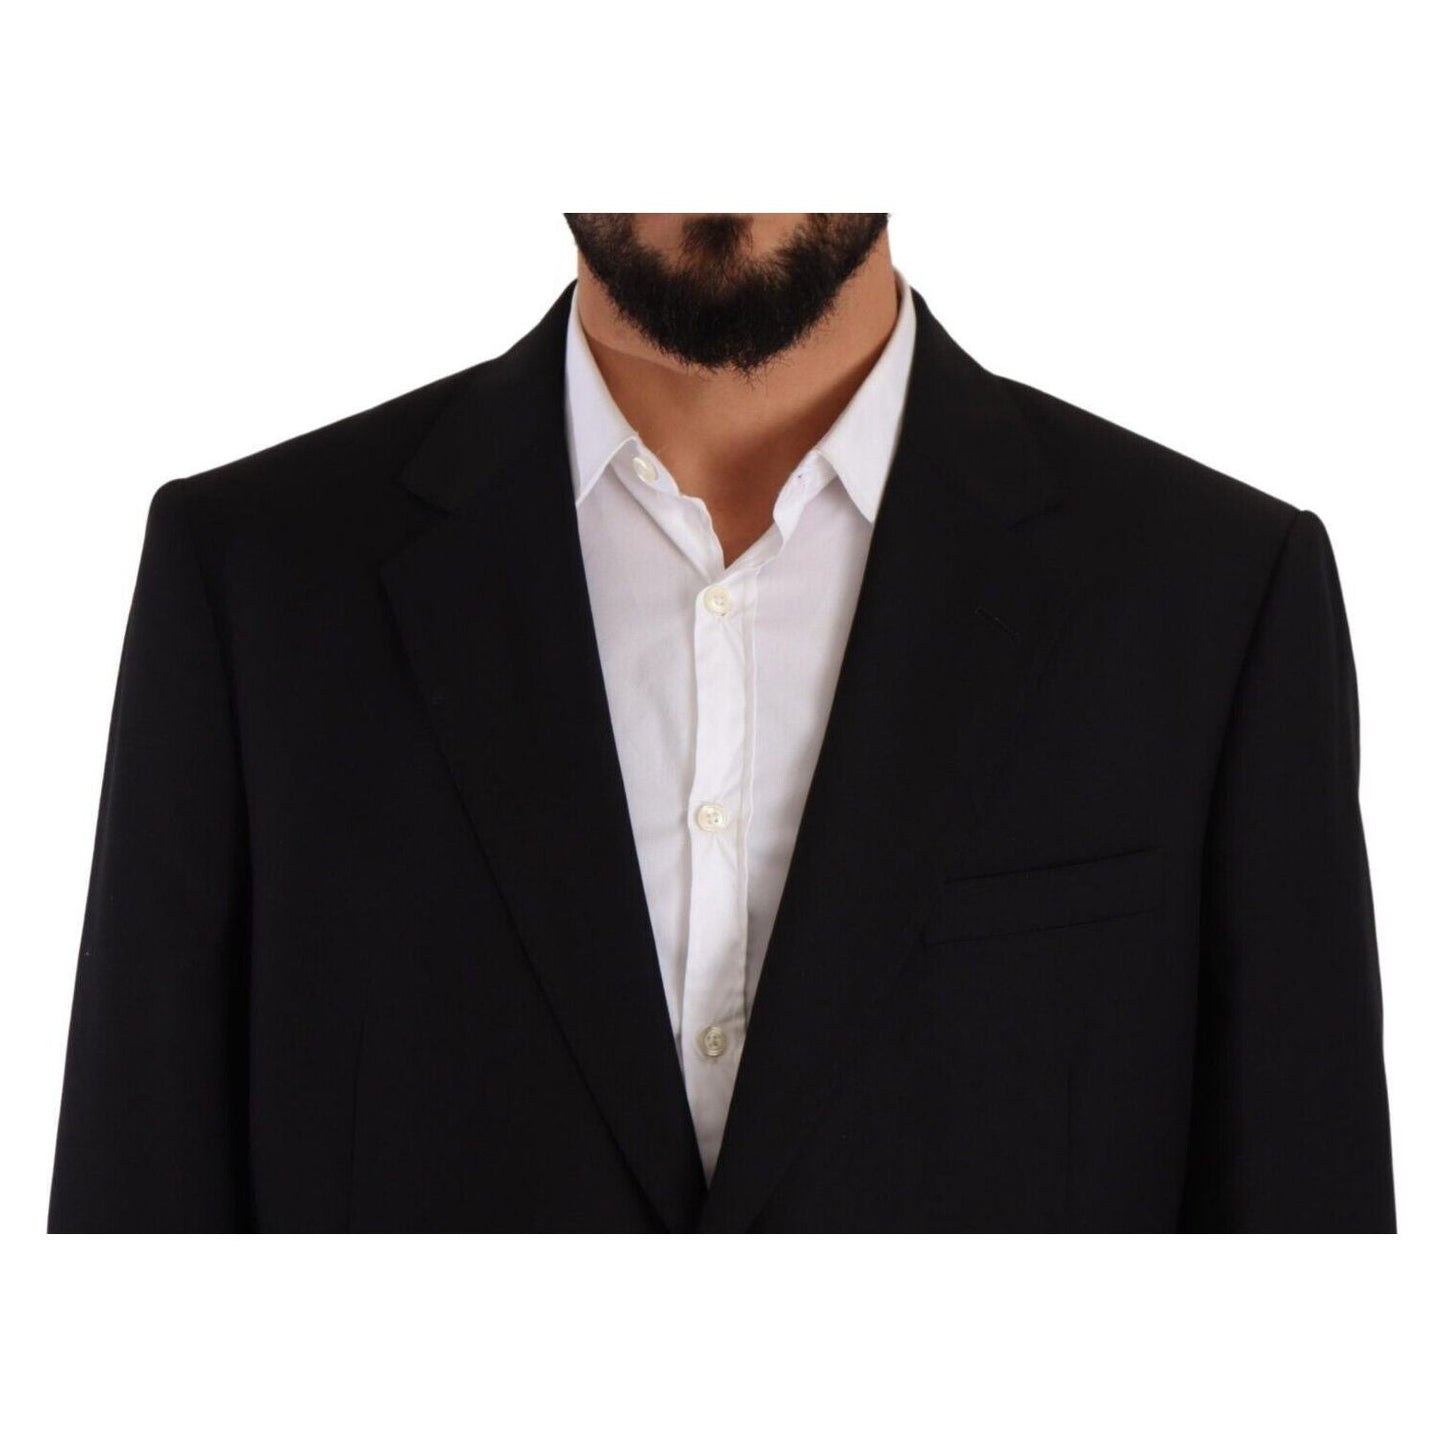 Domenico Tagliente Elegant Two-Piece Deconstructed Suit black-polyester-single-breasted-formal-suit-2